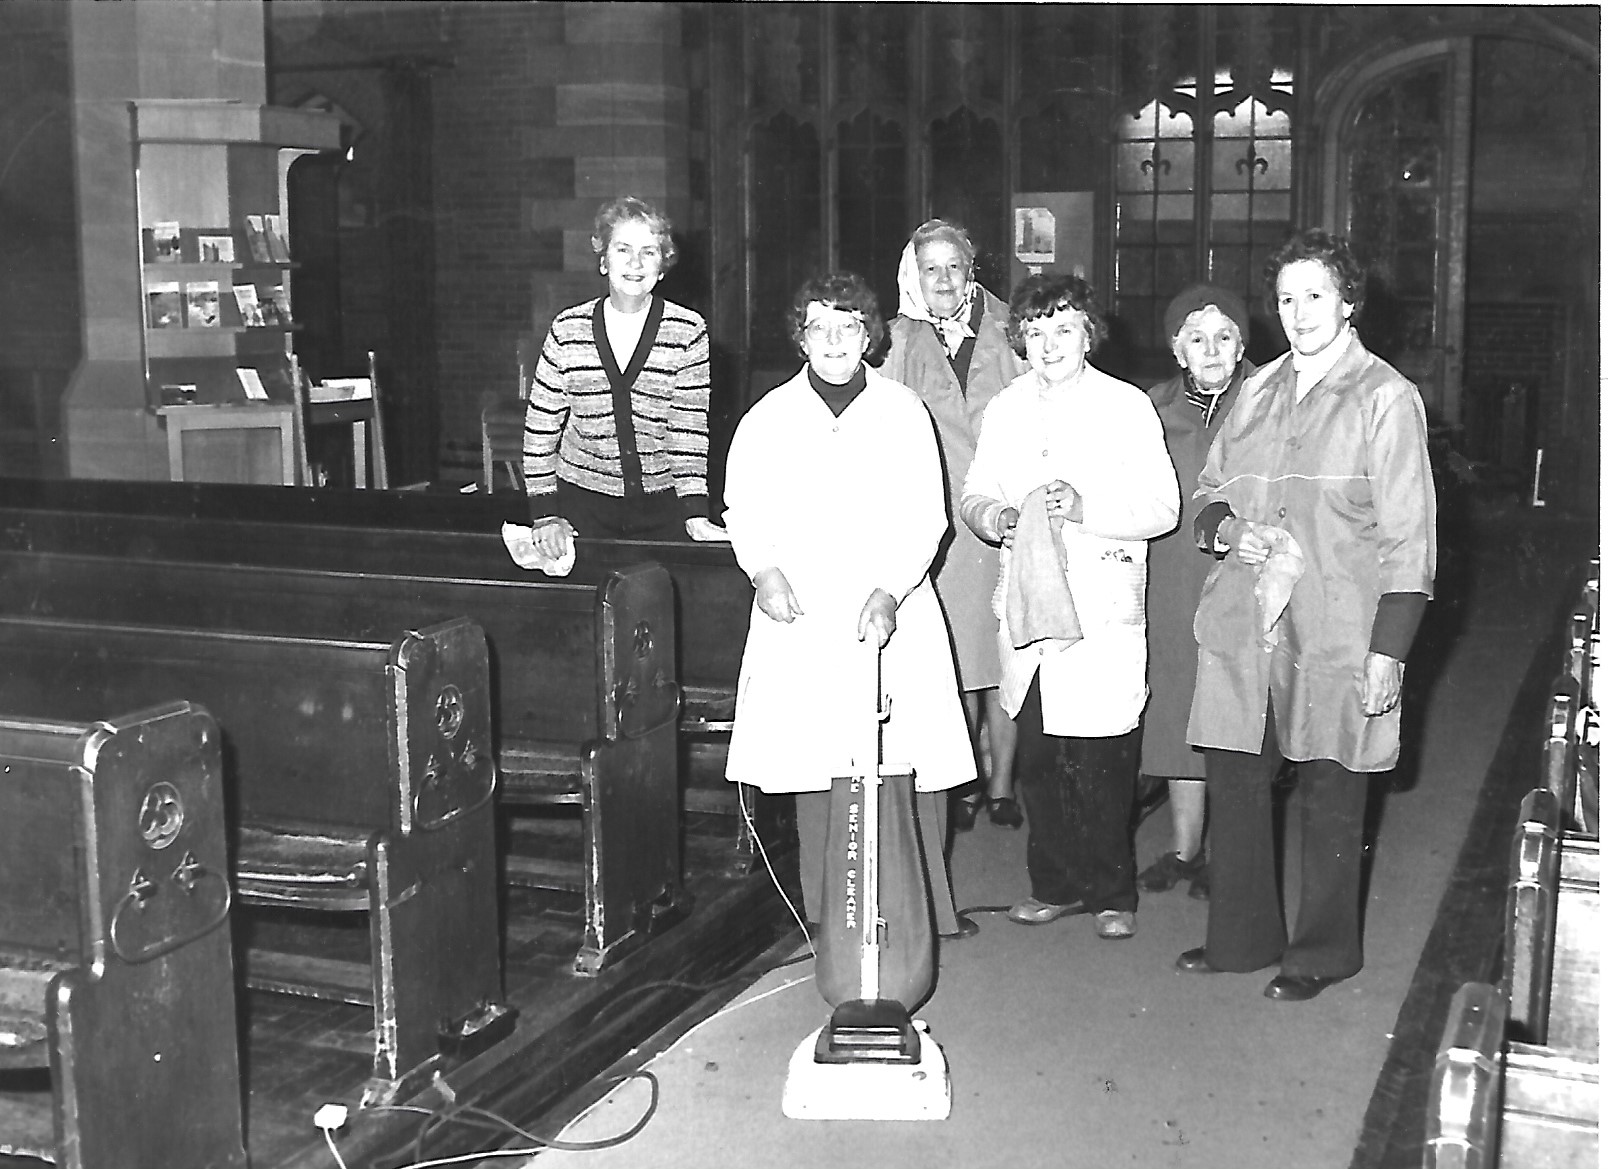 Parishioners at Holy Trinity Church in Southport give the building a good clean ready for Christmas, in December 1983